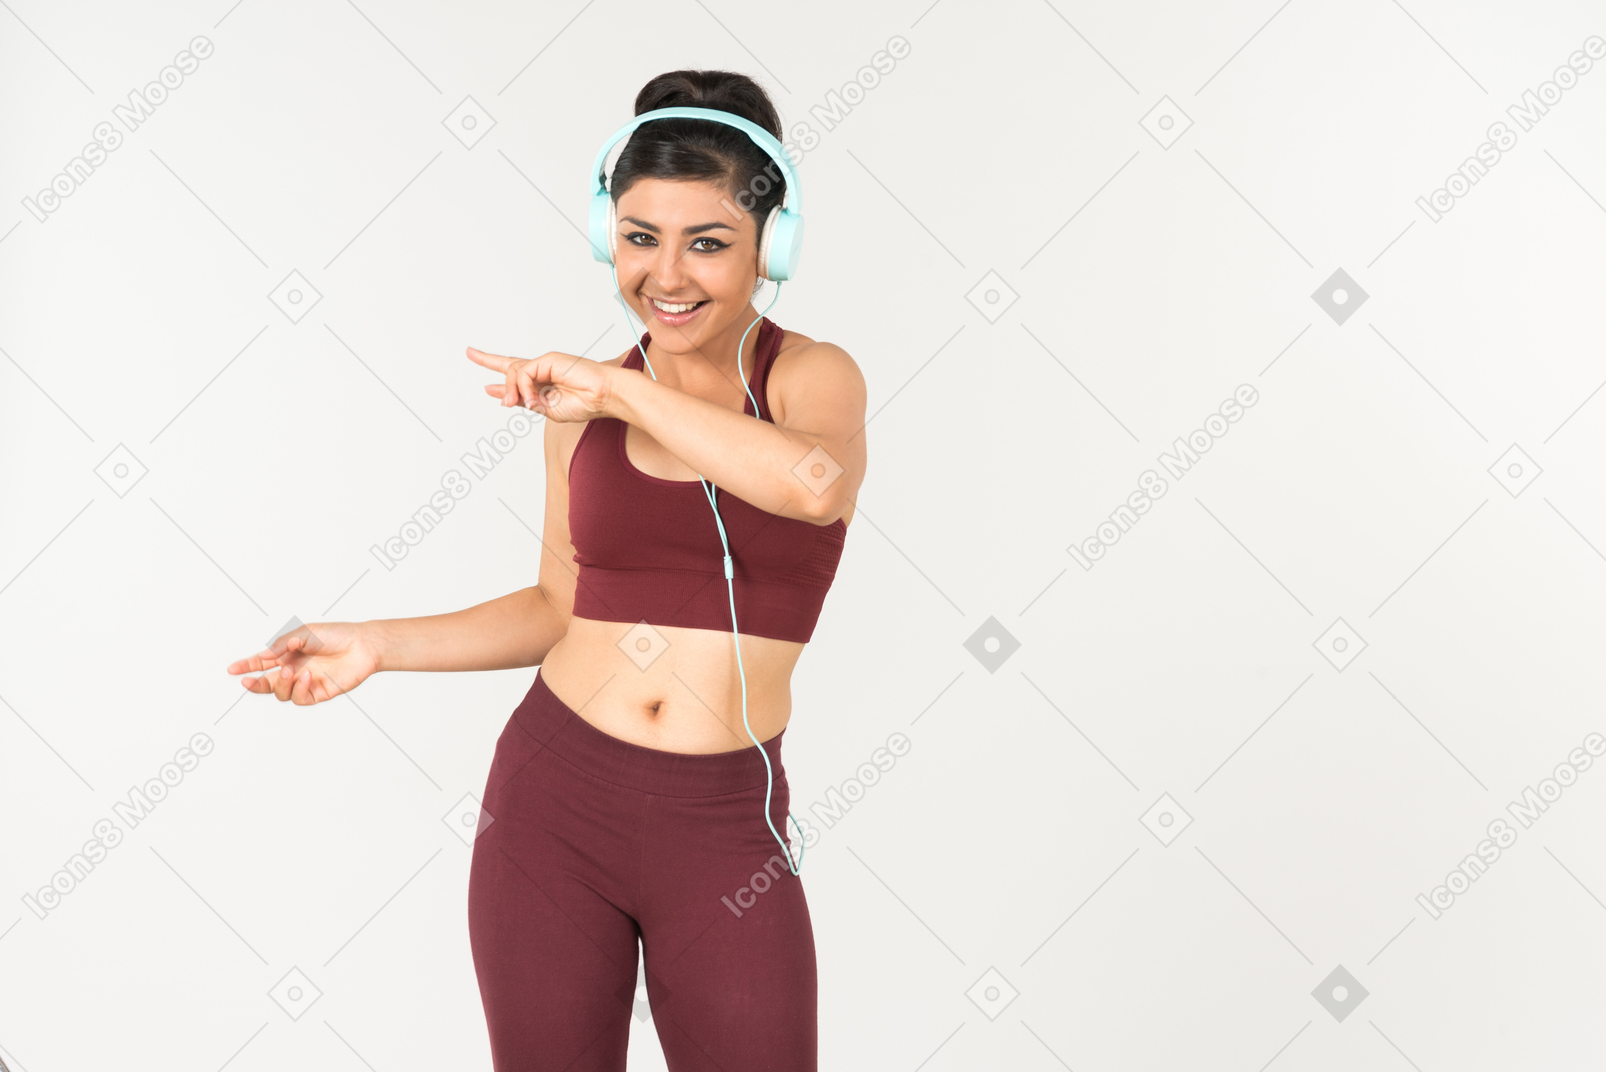 Laughing young indian woman in sporstwear listening to music in headphones